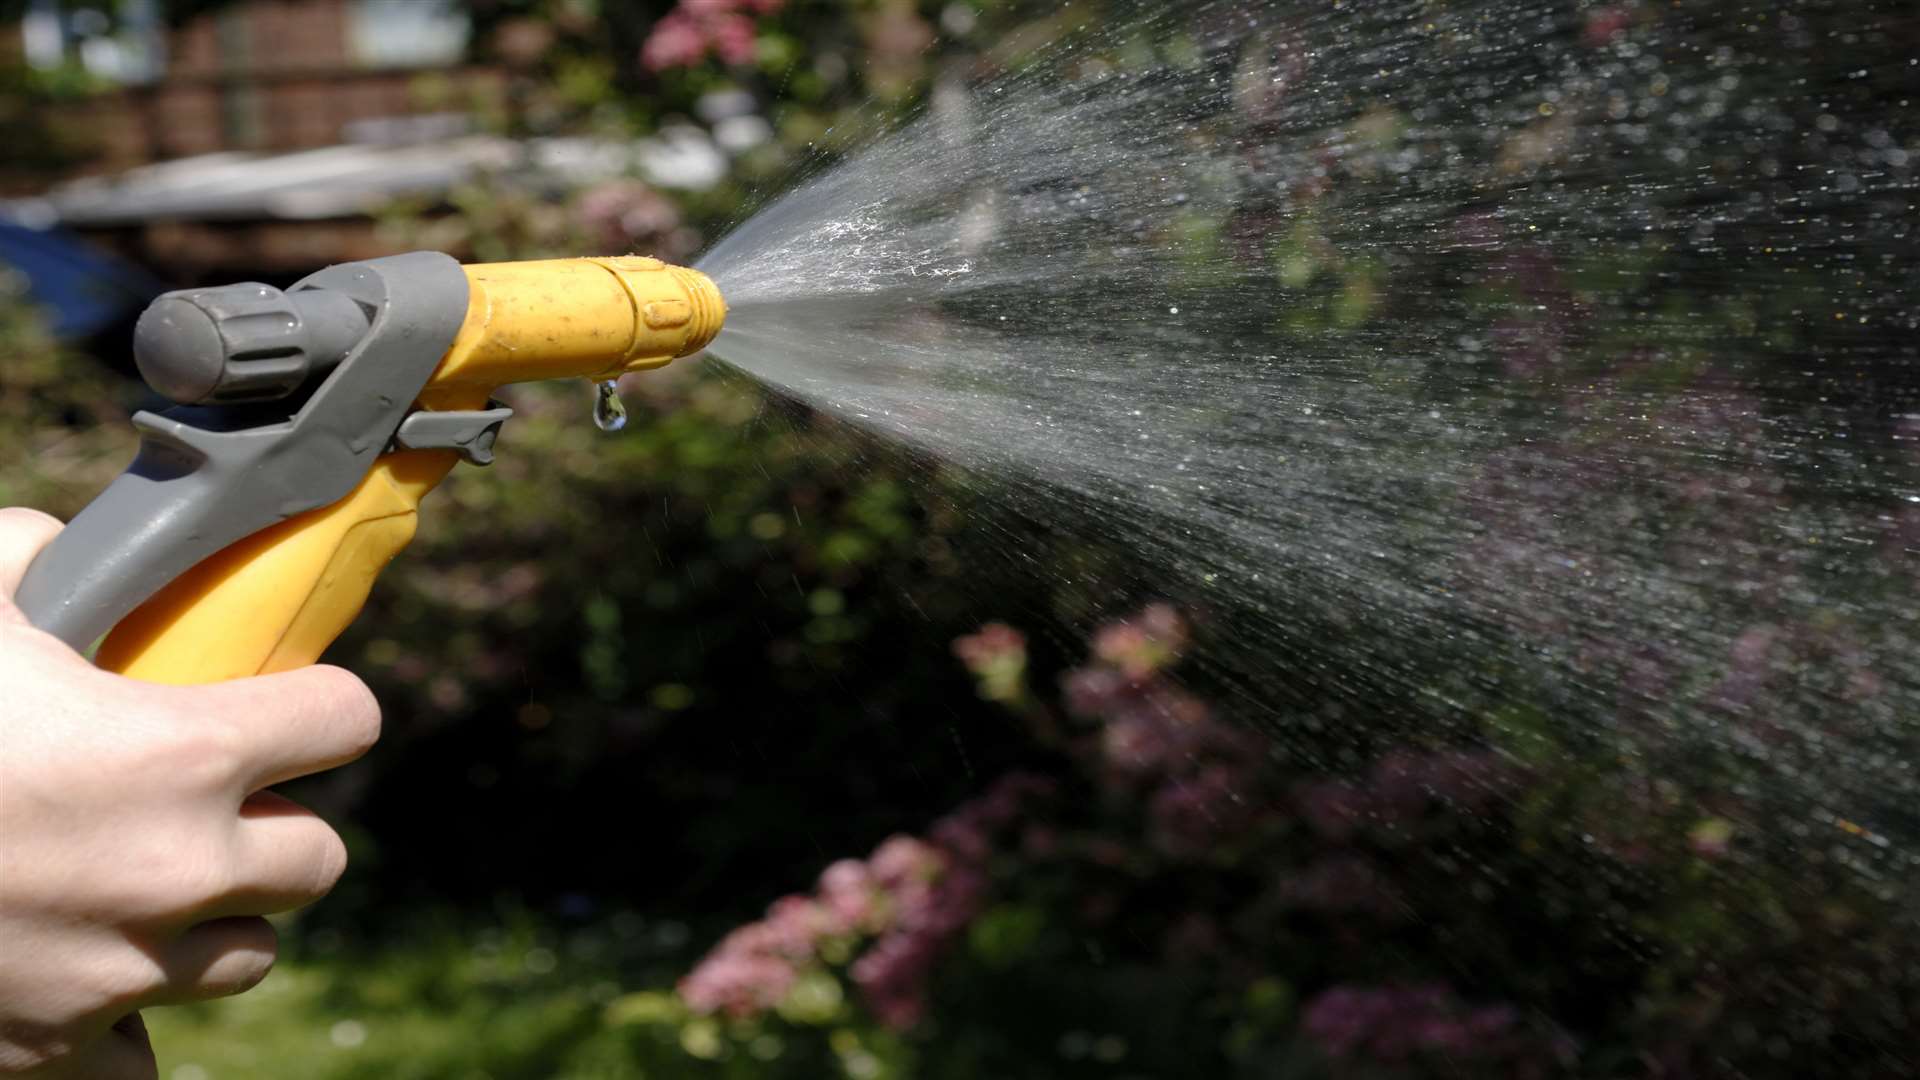 Could we be getting a hosepipe ban?